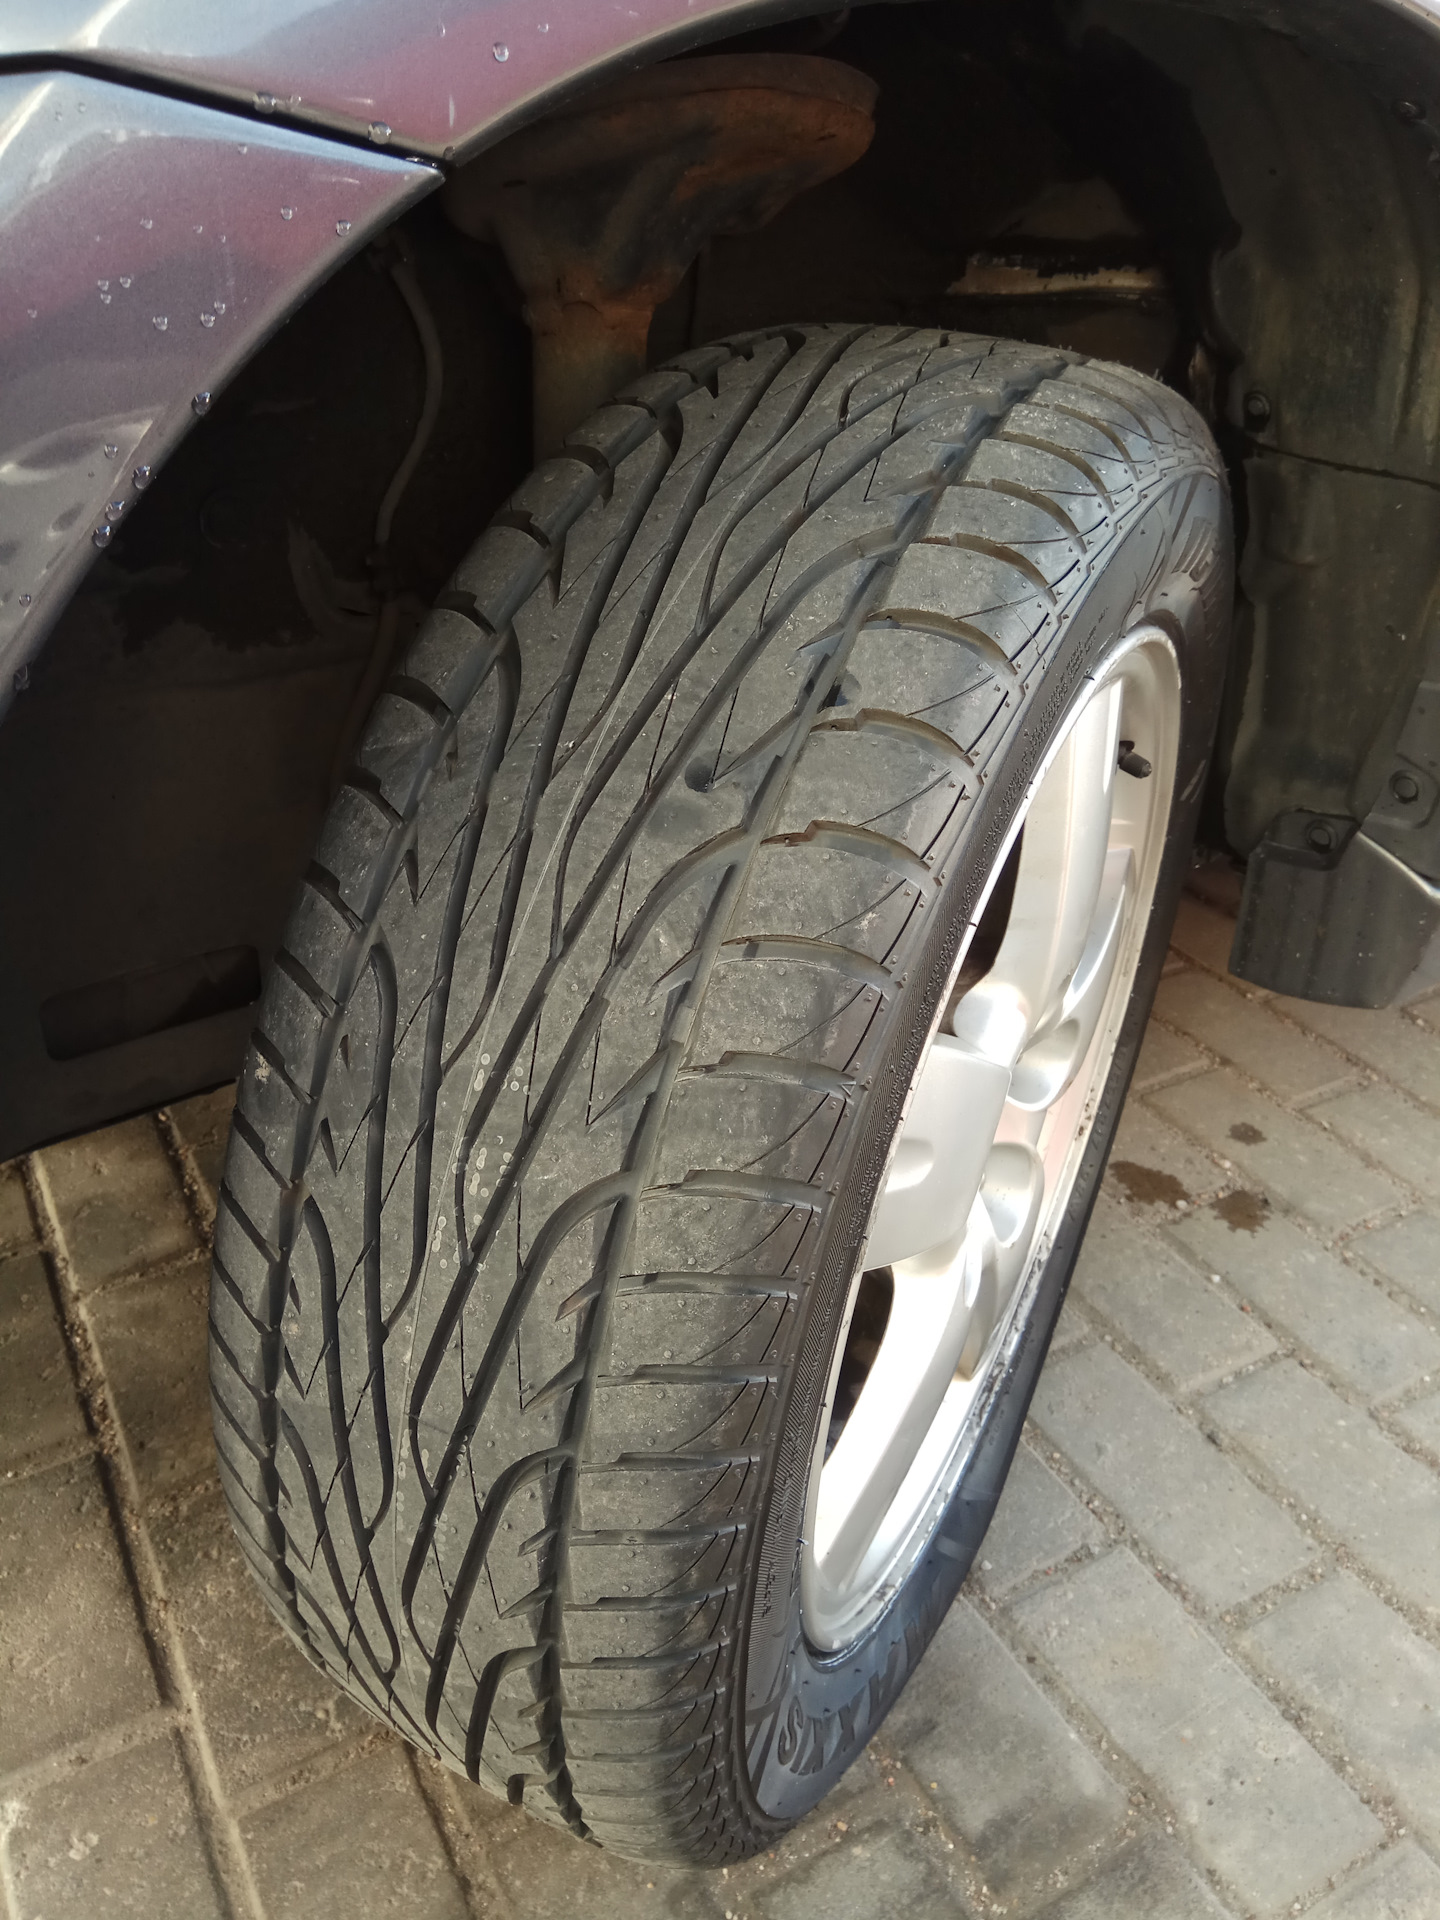 Maxxis отзывы лето. Maxxis Victra z3 215/55 r17. Шины Максис Victra ma-z3. 215/55r17 Maxxis Victra ma-z3 98w. 205/50r17, Maxxis ma-z3 Victra 93w.